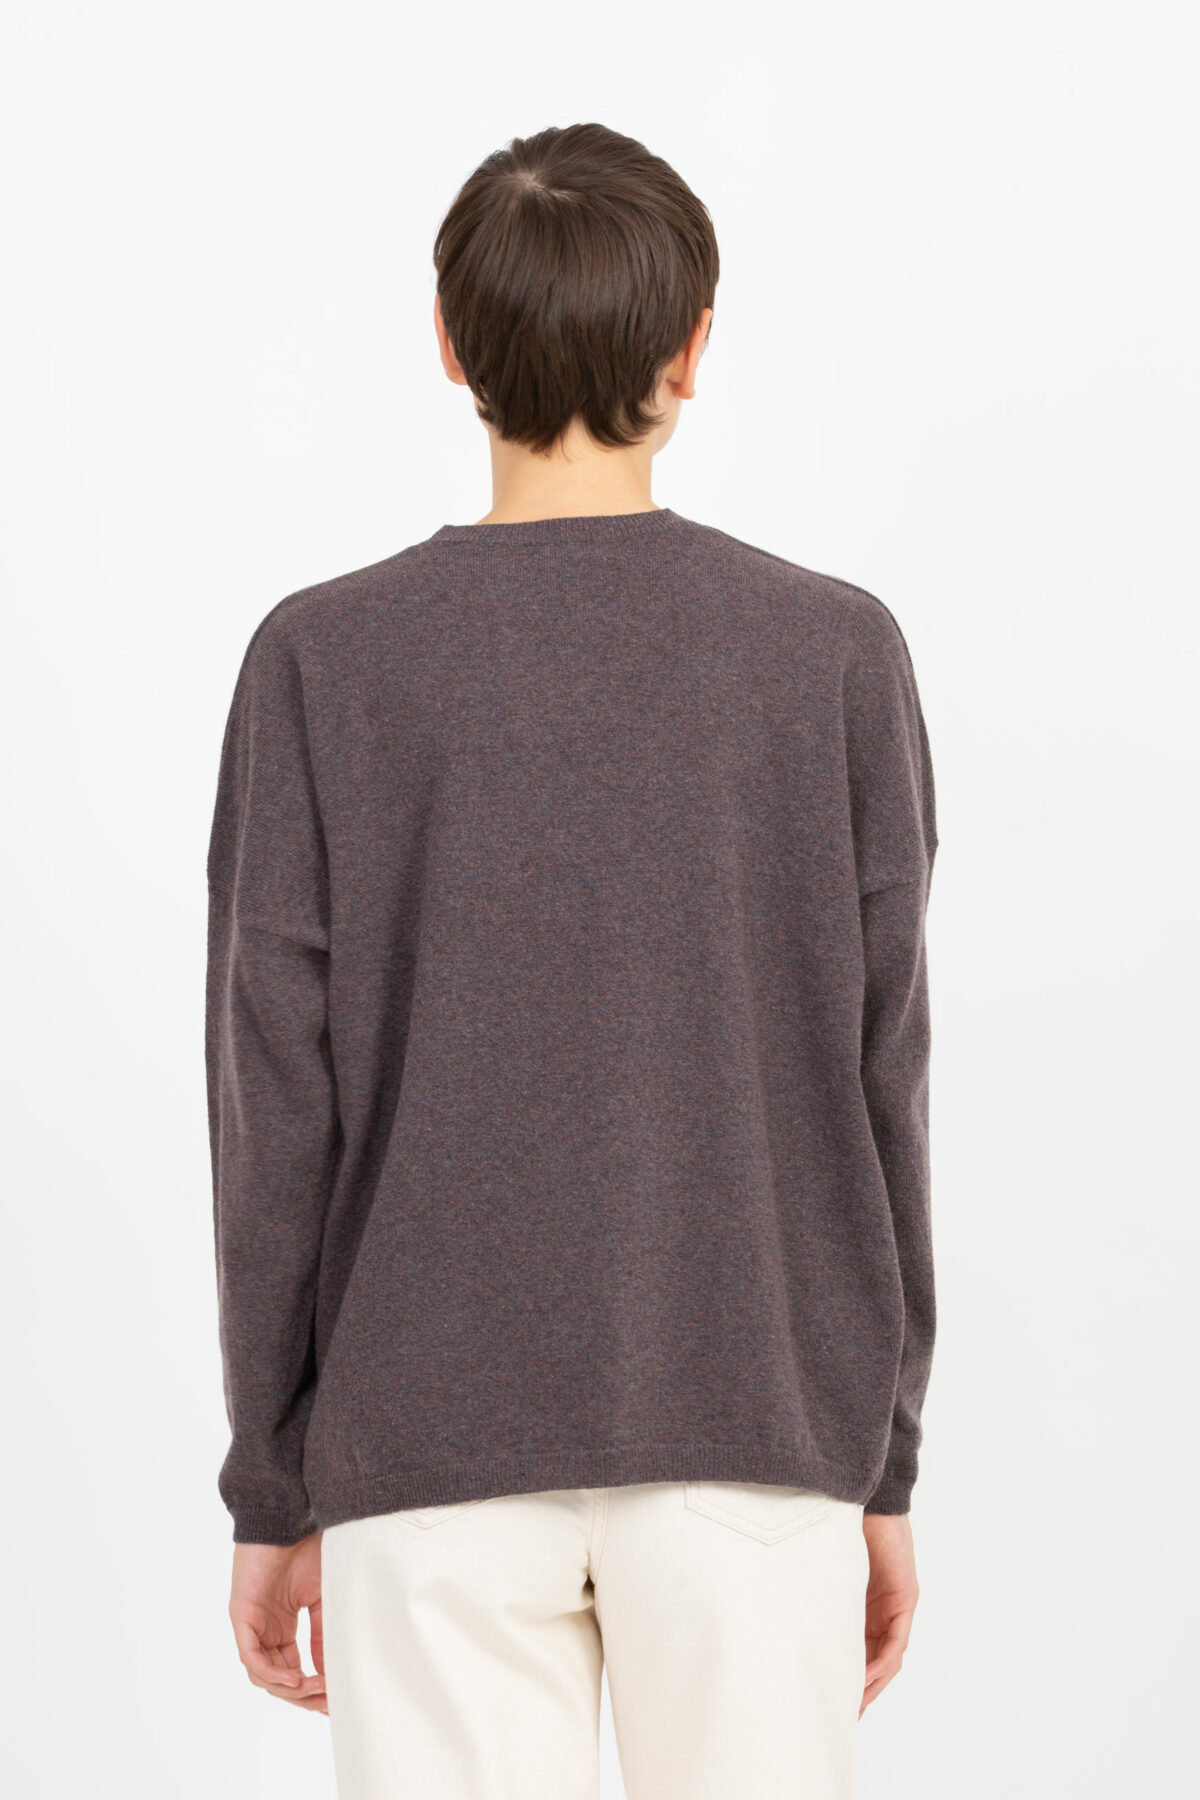 malles-brown-cashemre-wool-sweater-relaxed-round-neck-crossley-matchboxathens